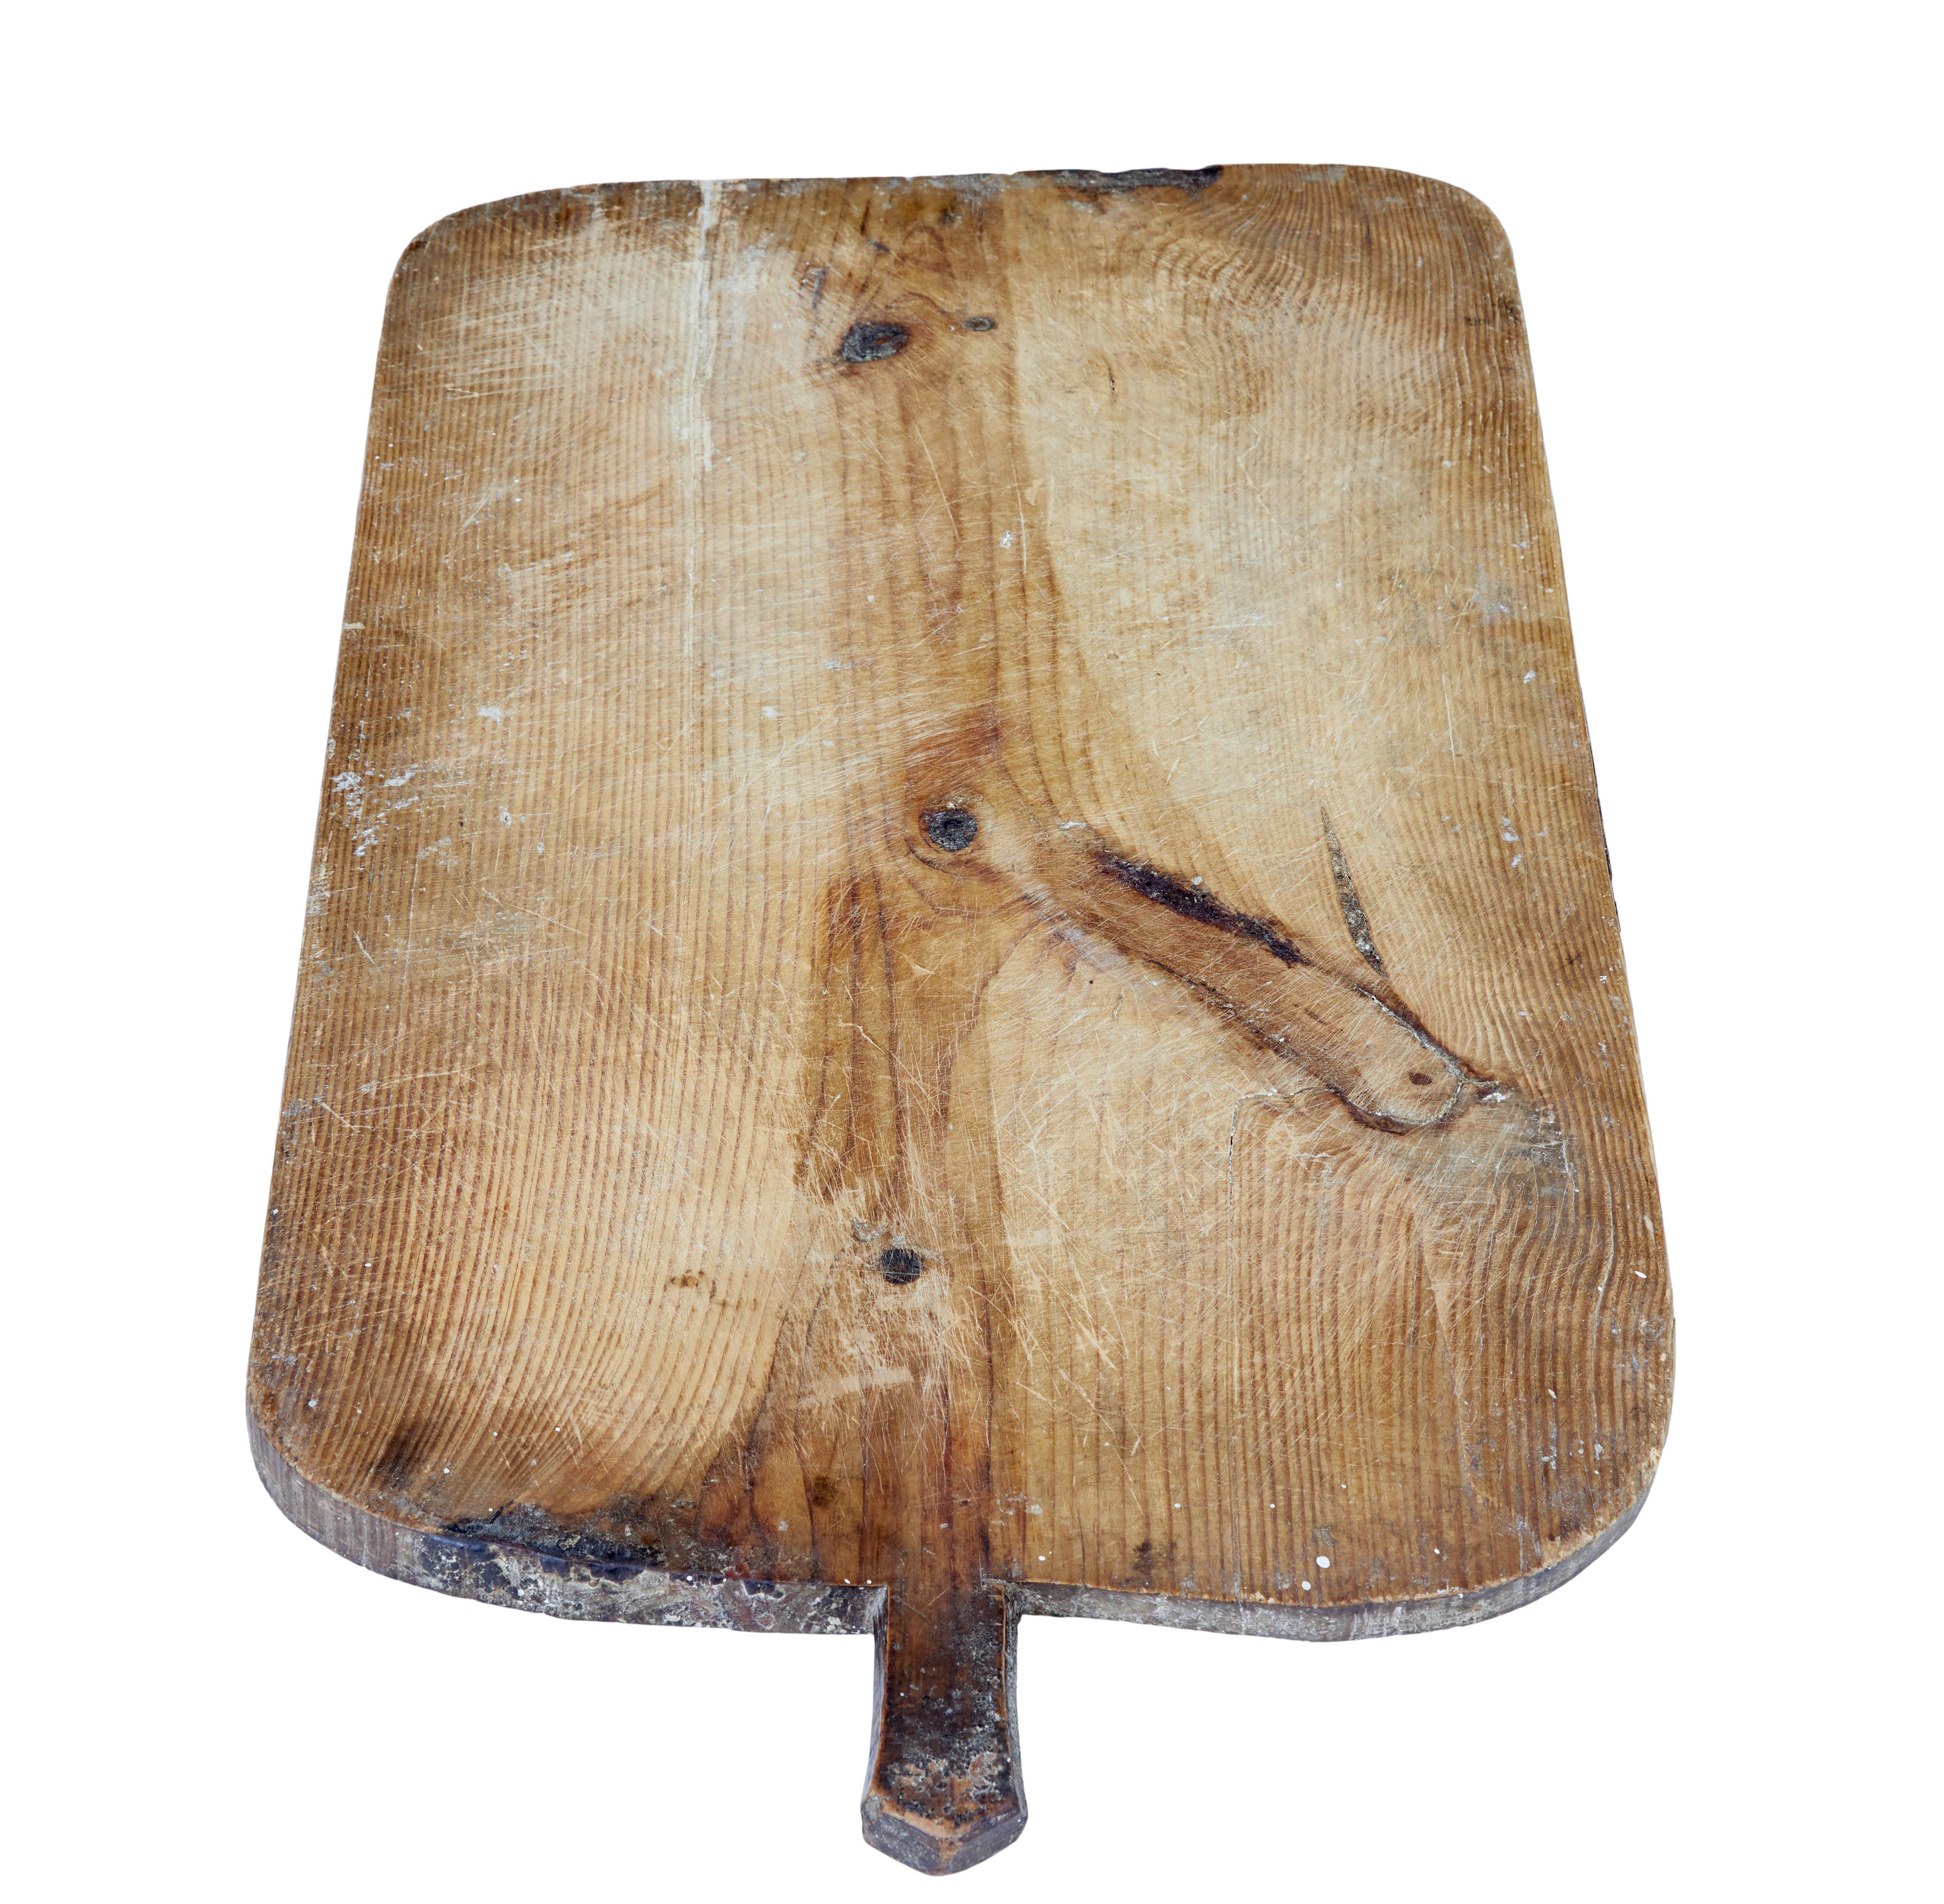 Swedish 19th century pine bread serving board circa 1890.

Good quality piece of rustic kitchenalia from sweden which maintains some of it's original patina.

Perfect for display or for being put to use on the table.

Obvious surface marks